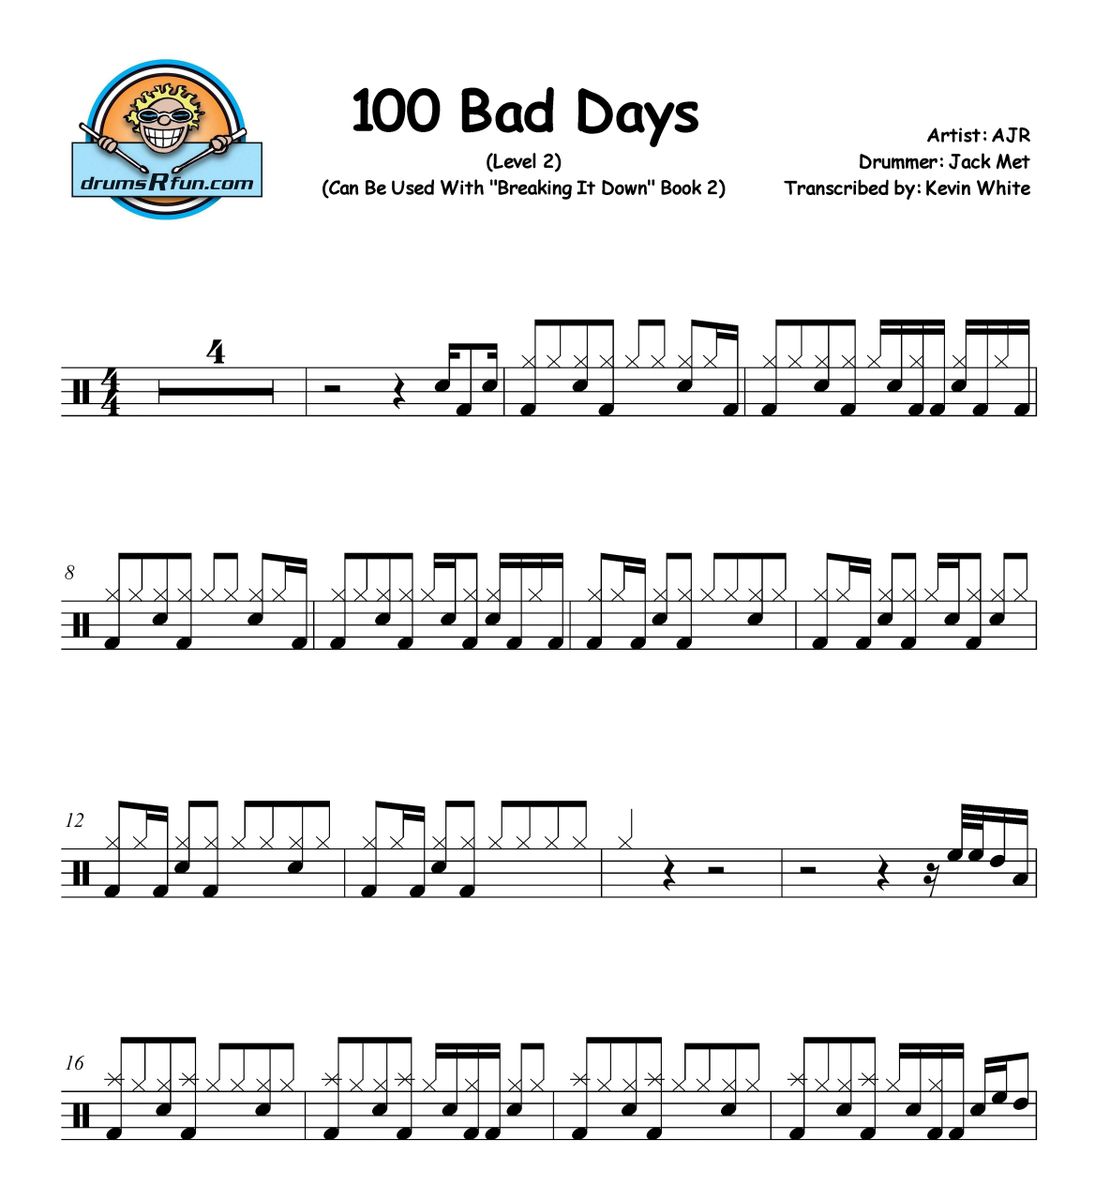 What does 100 Bad Days by AJR mean? — The Pop Song Professor